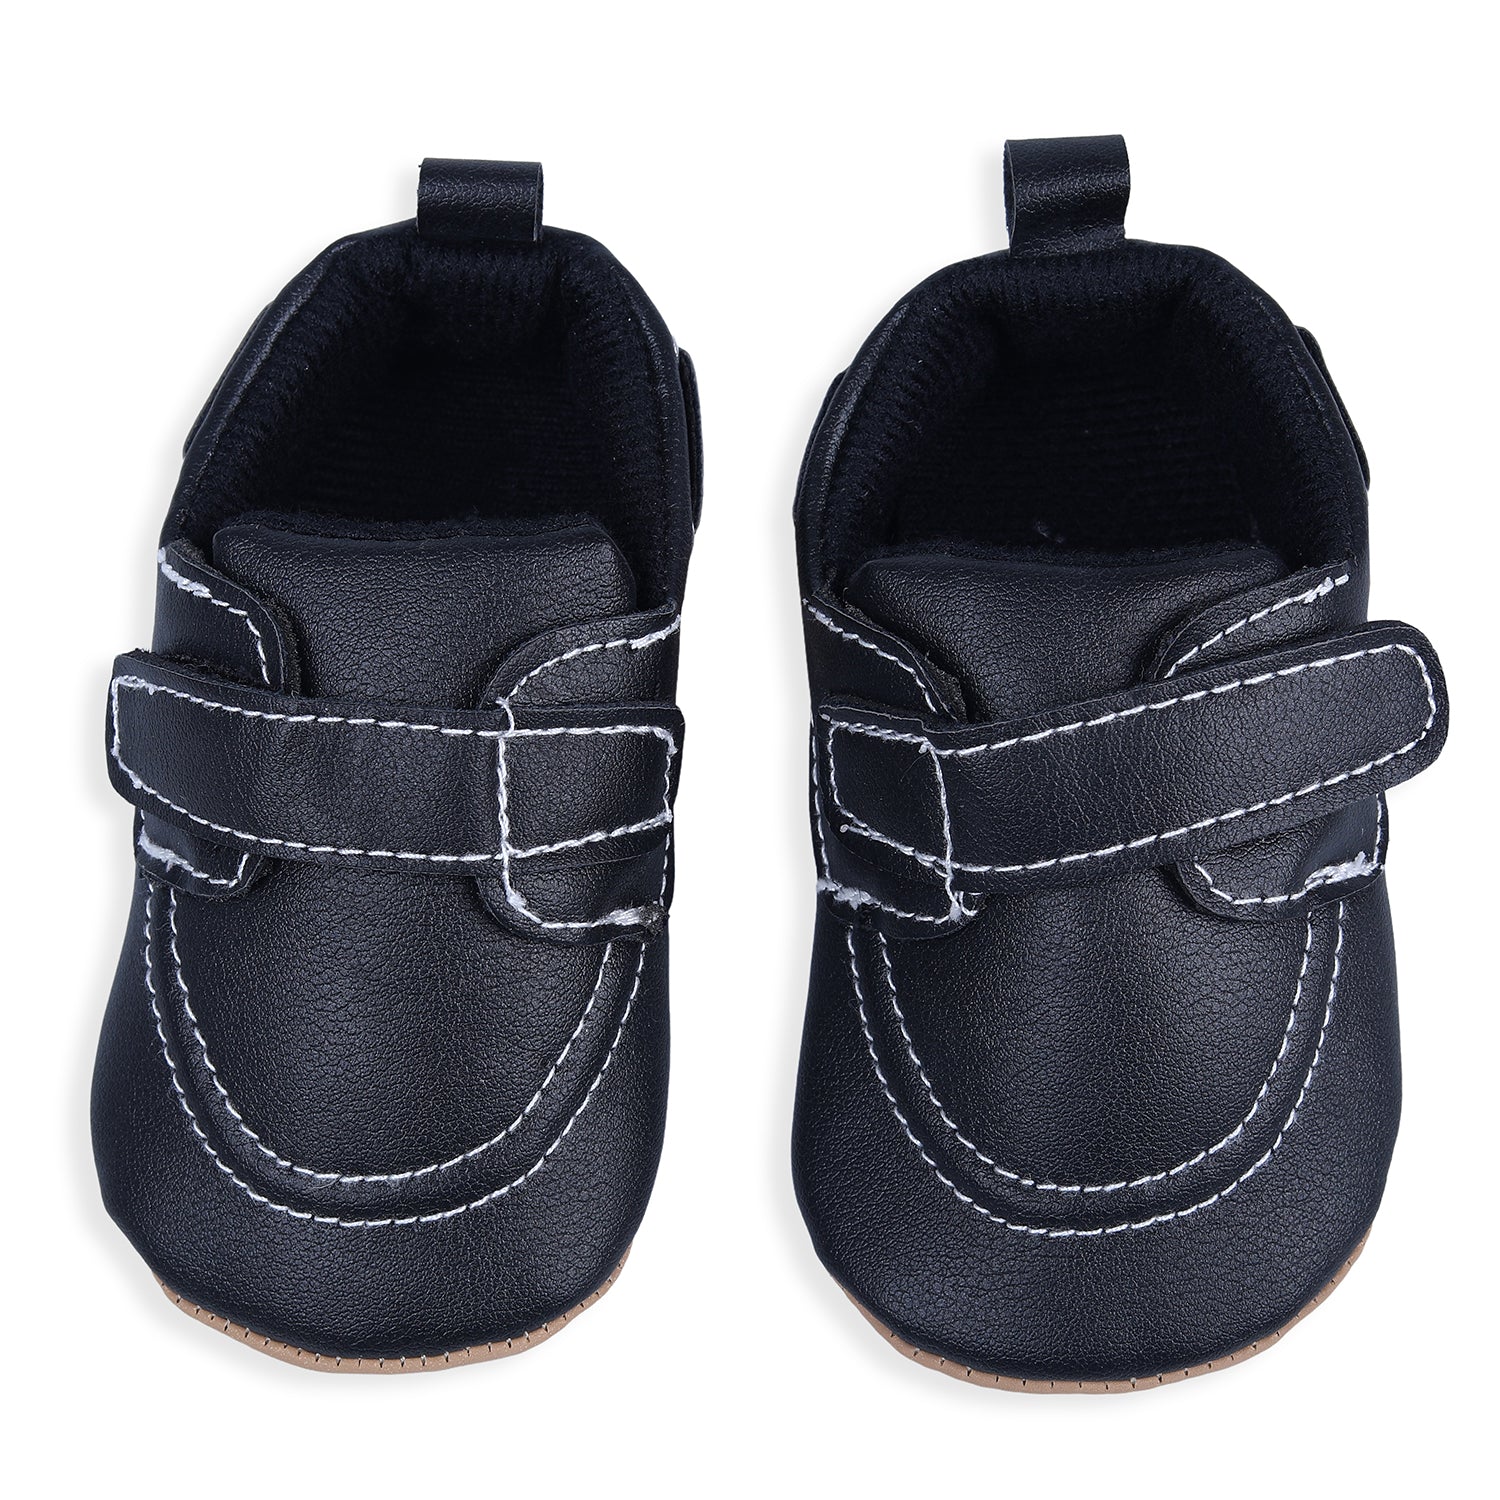 Solid Hookloop Stylish Leather Velcro Shoes - Black - Baby Moo